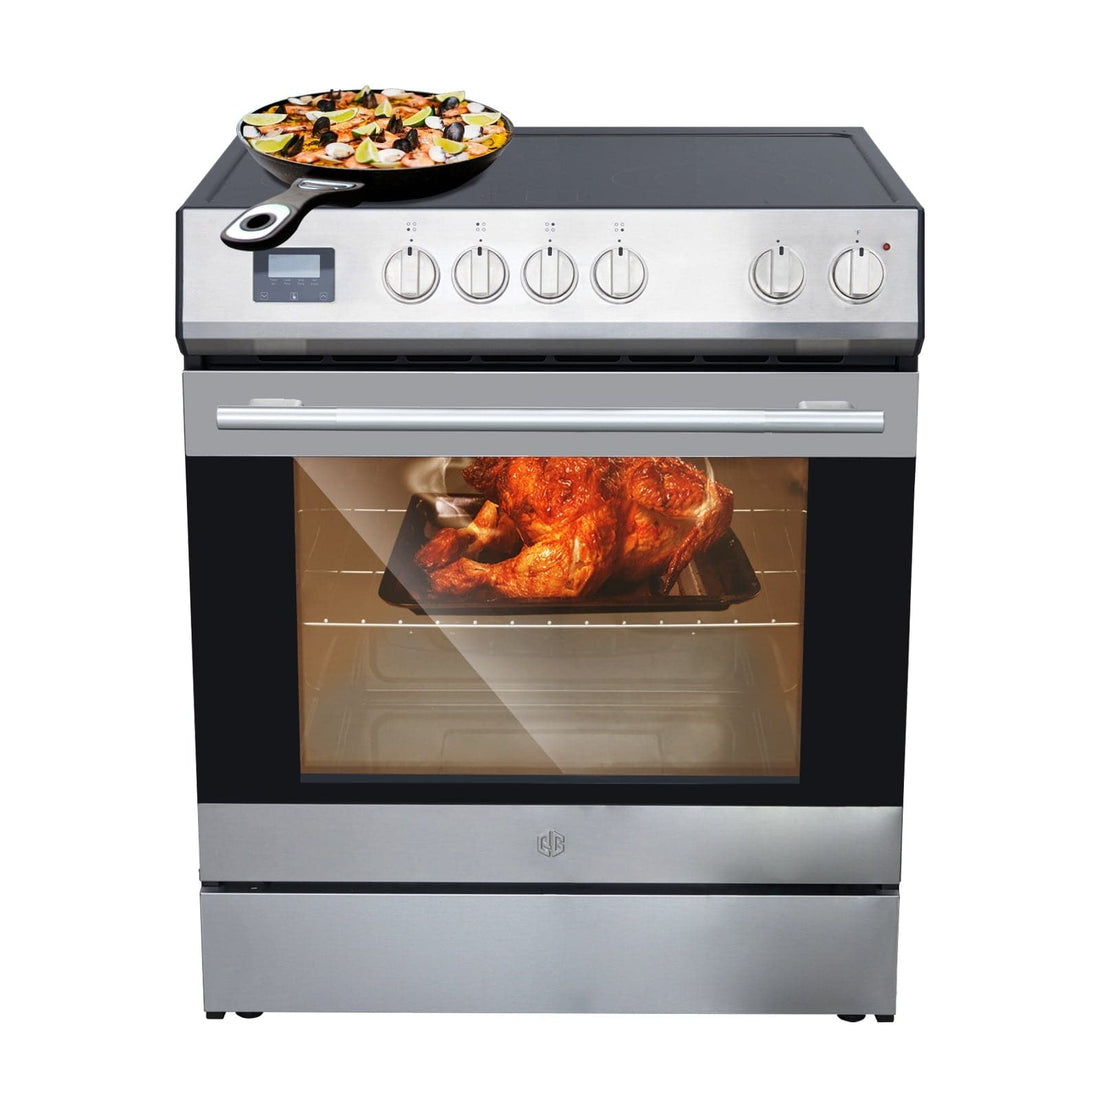 Front Control Electric Range Oven with 5 Cooktop Elements with 6 Cooking Power Options, Freestanding Oven, 5.0 cu. ft. Capacity Stainless Steel